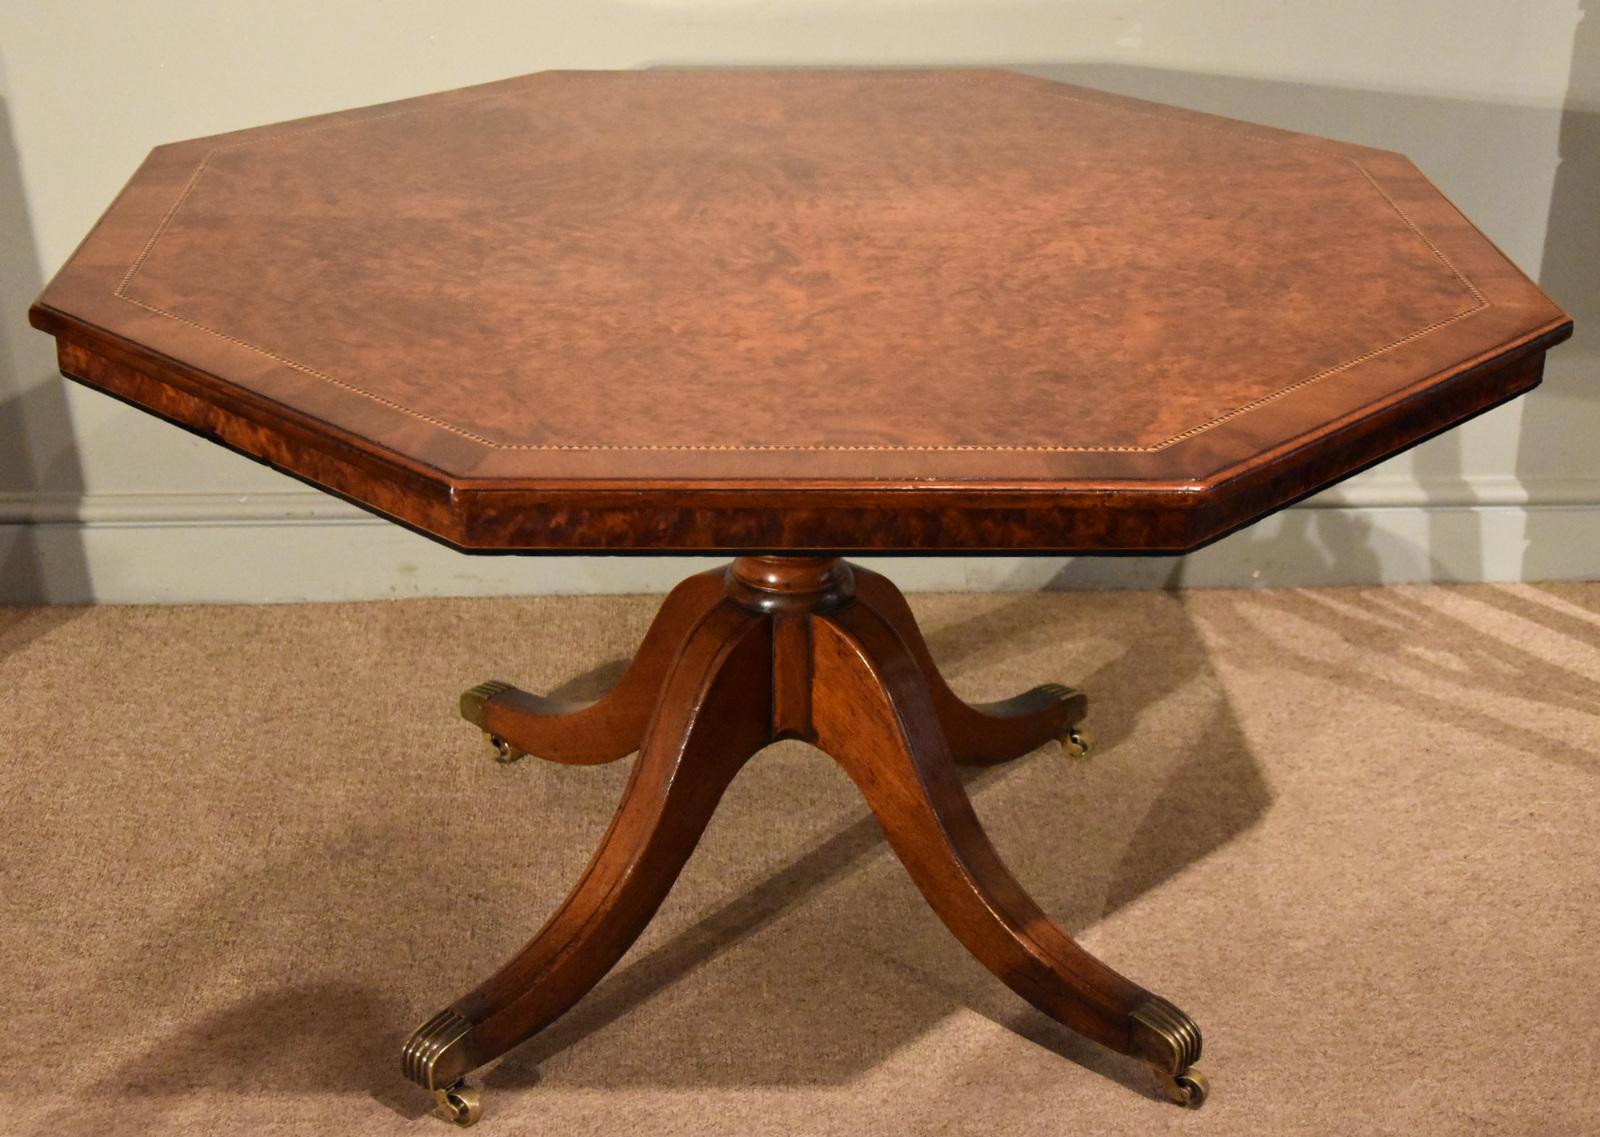 Mid-19th century yew wood hexagonal table inlaid stamped gillows. This table has been through the wars, the base was lost and 1820 base was put on so exceptional top with an earlier base marriage.

Dimensions:
Height 28